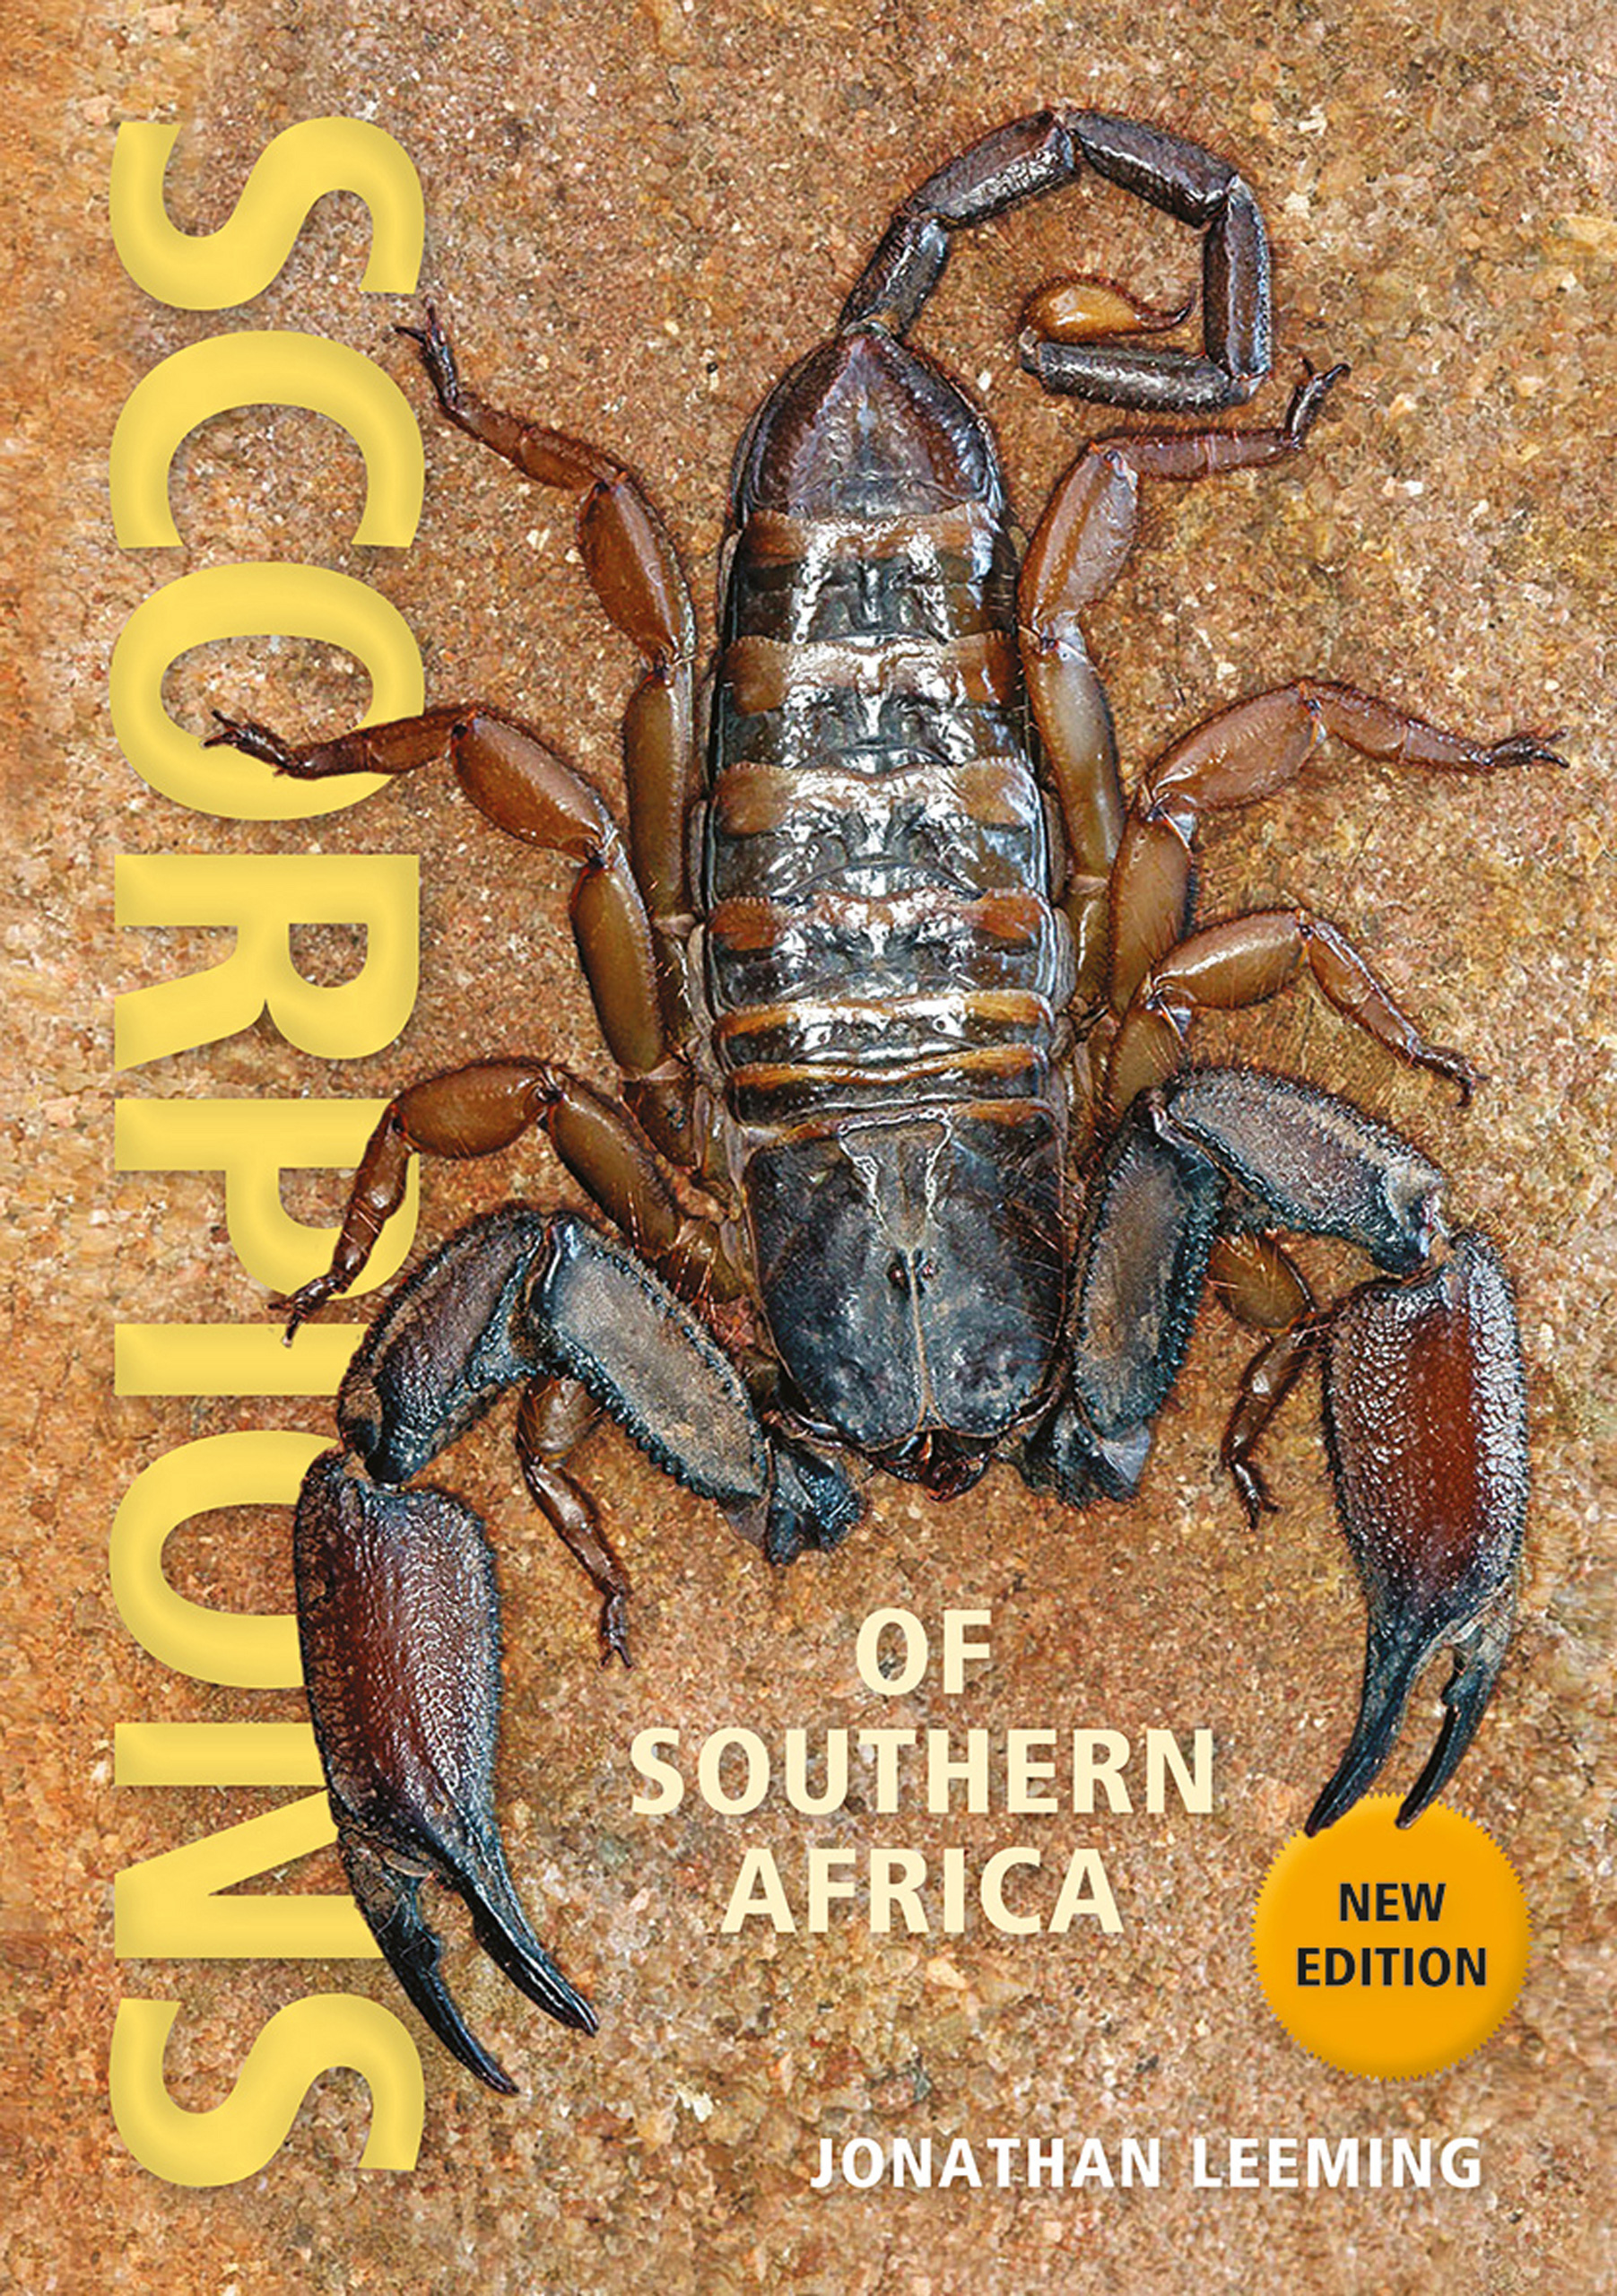 Picture of Scorpions of Southern Africa